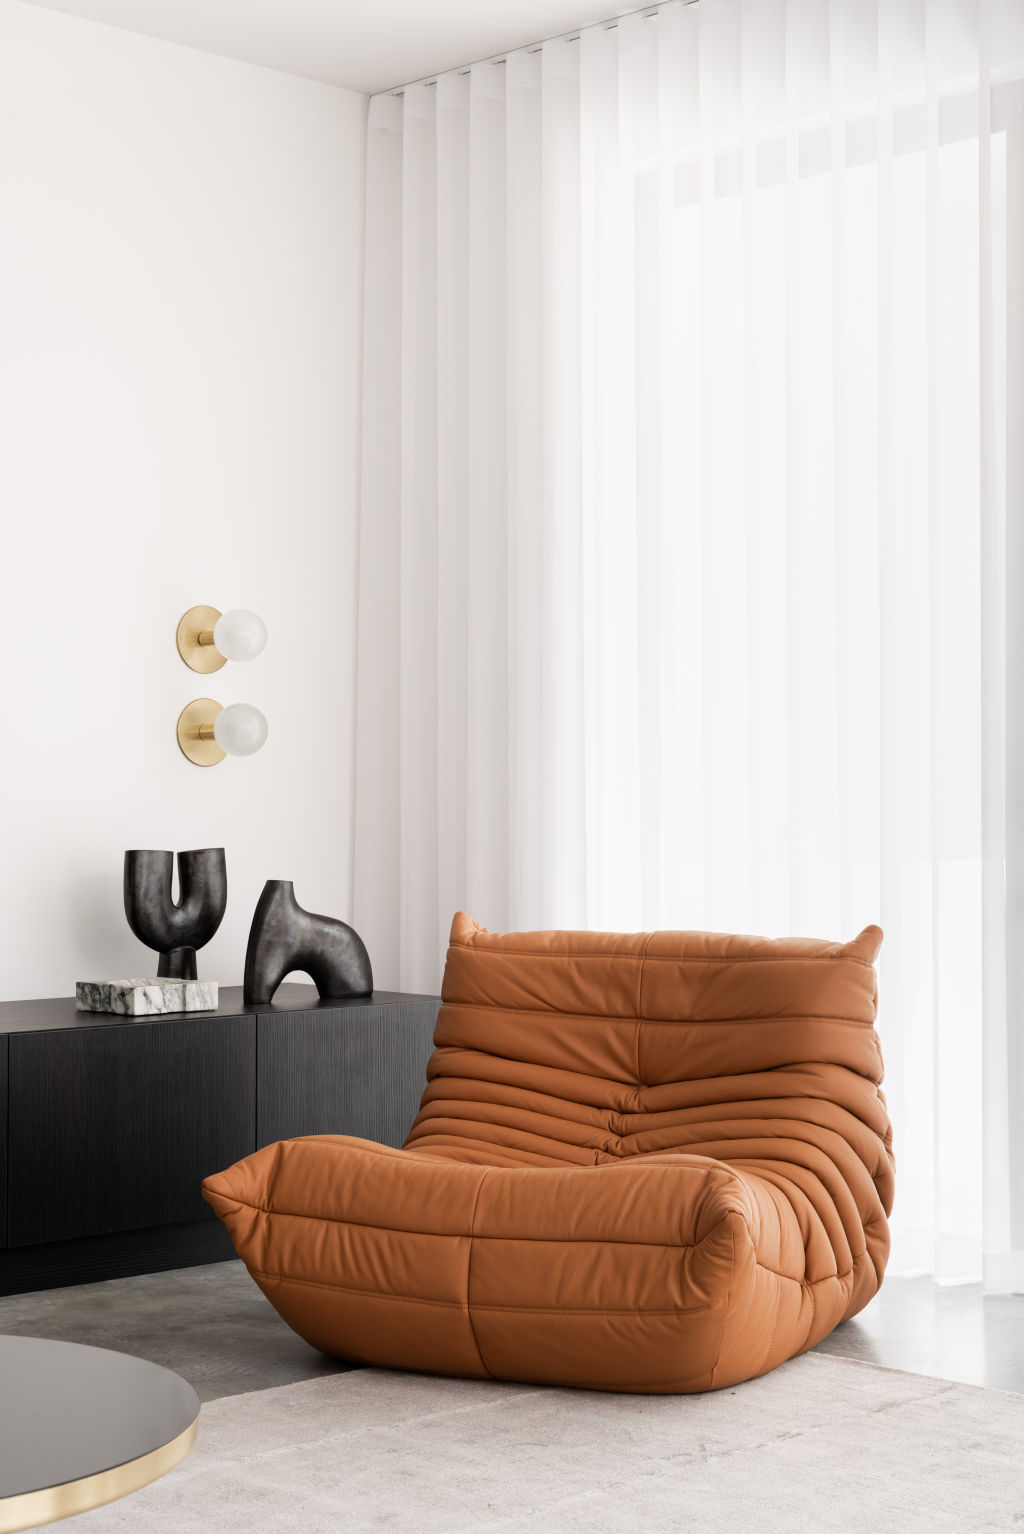 The Togo sofa from Ligne Roset is as contemporary today as it was 50 years ago says designer Nickolas Gurtler. Styling by Nickolas Gurtler. Photo: Dion Robeson